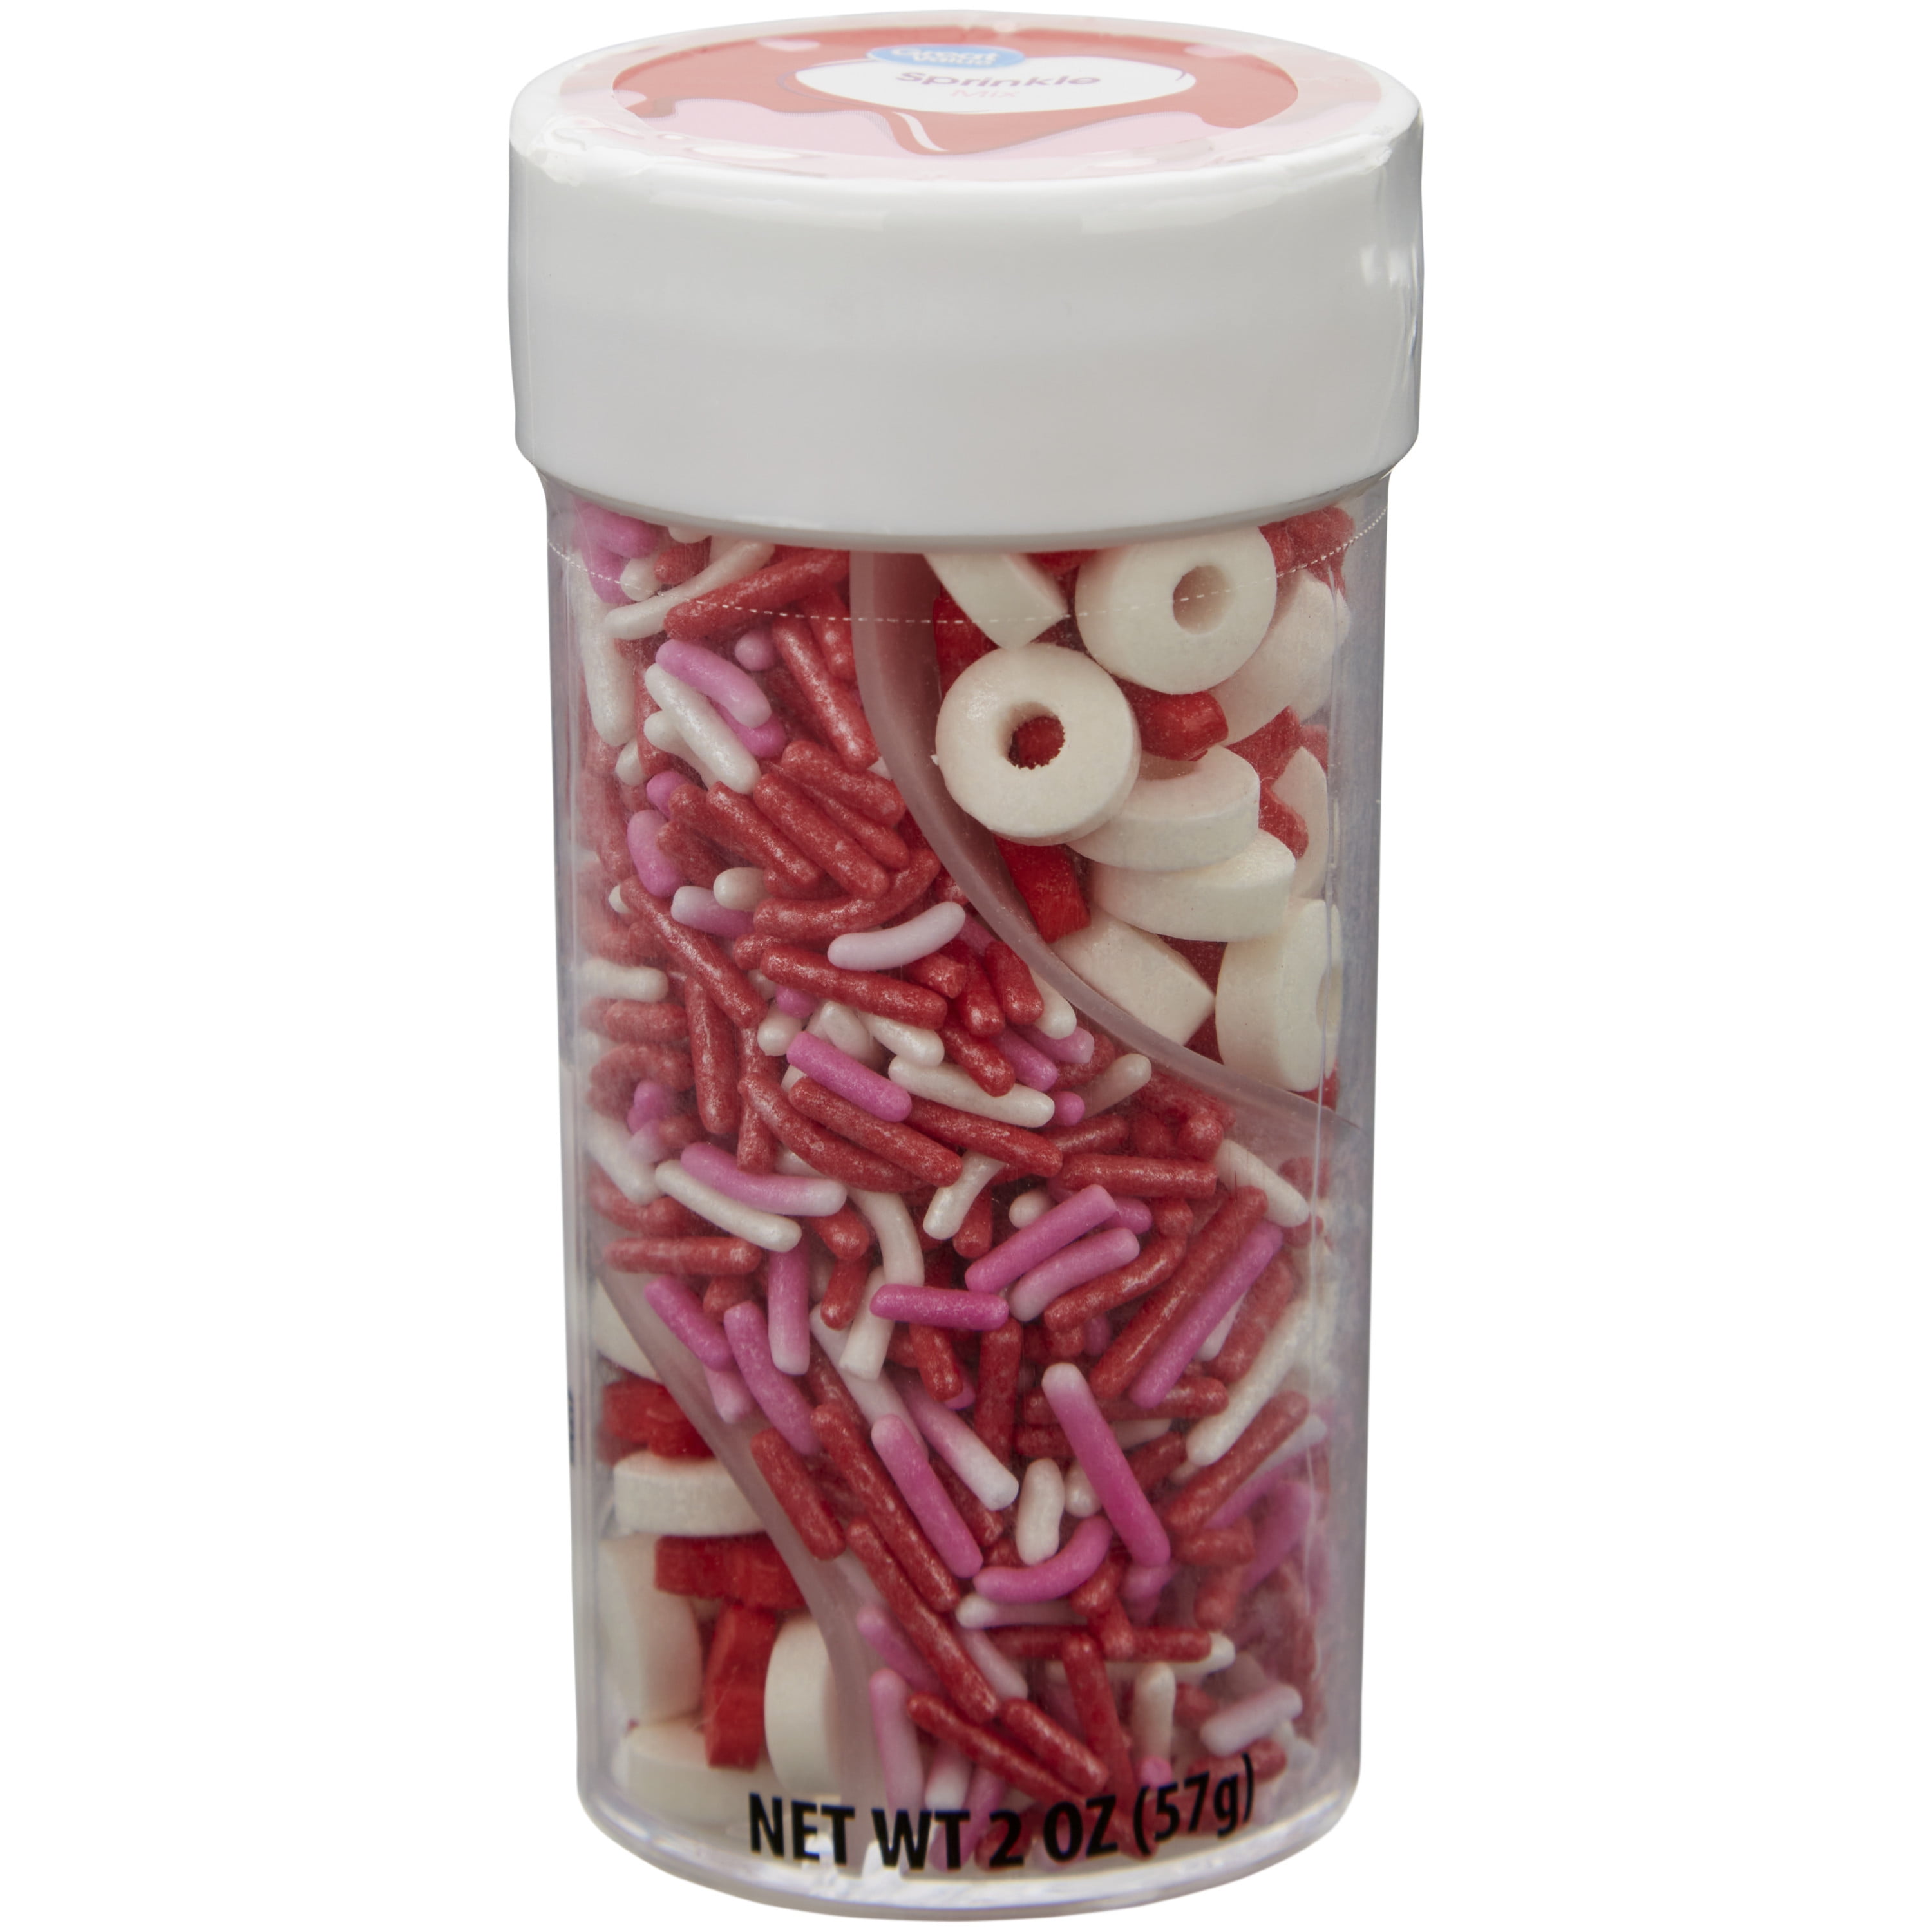 Great Value XO Red, Pink and White Valentine's Day Sprinkles Mix, 2 oz.